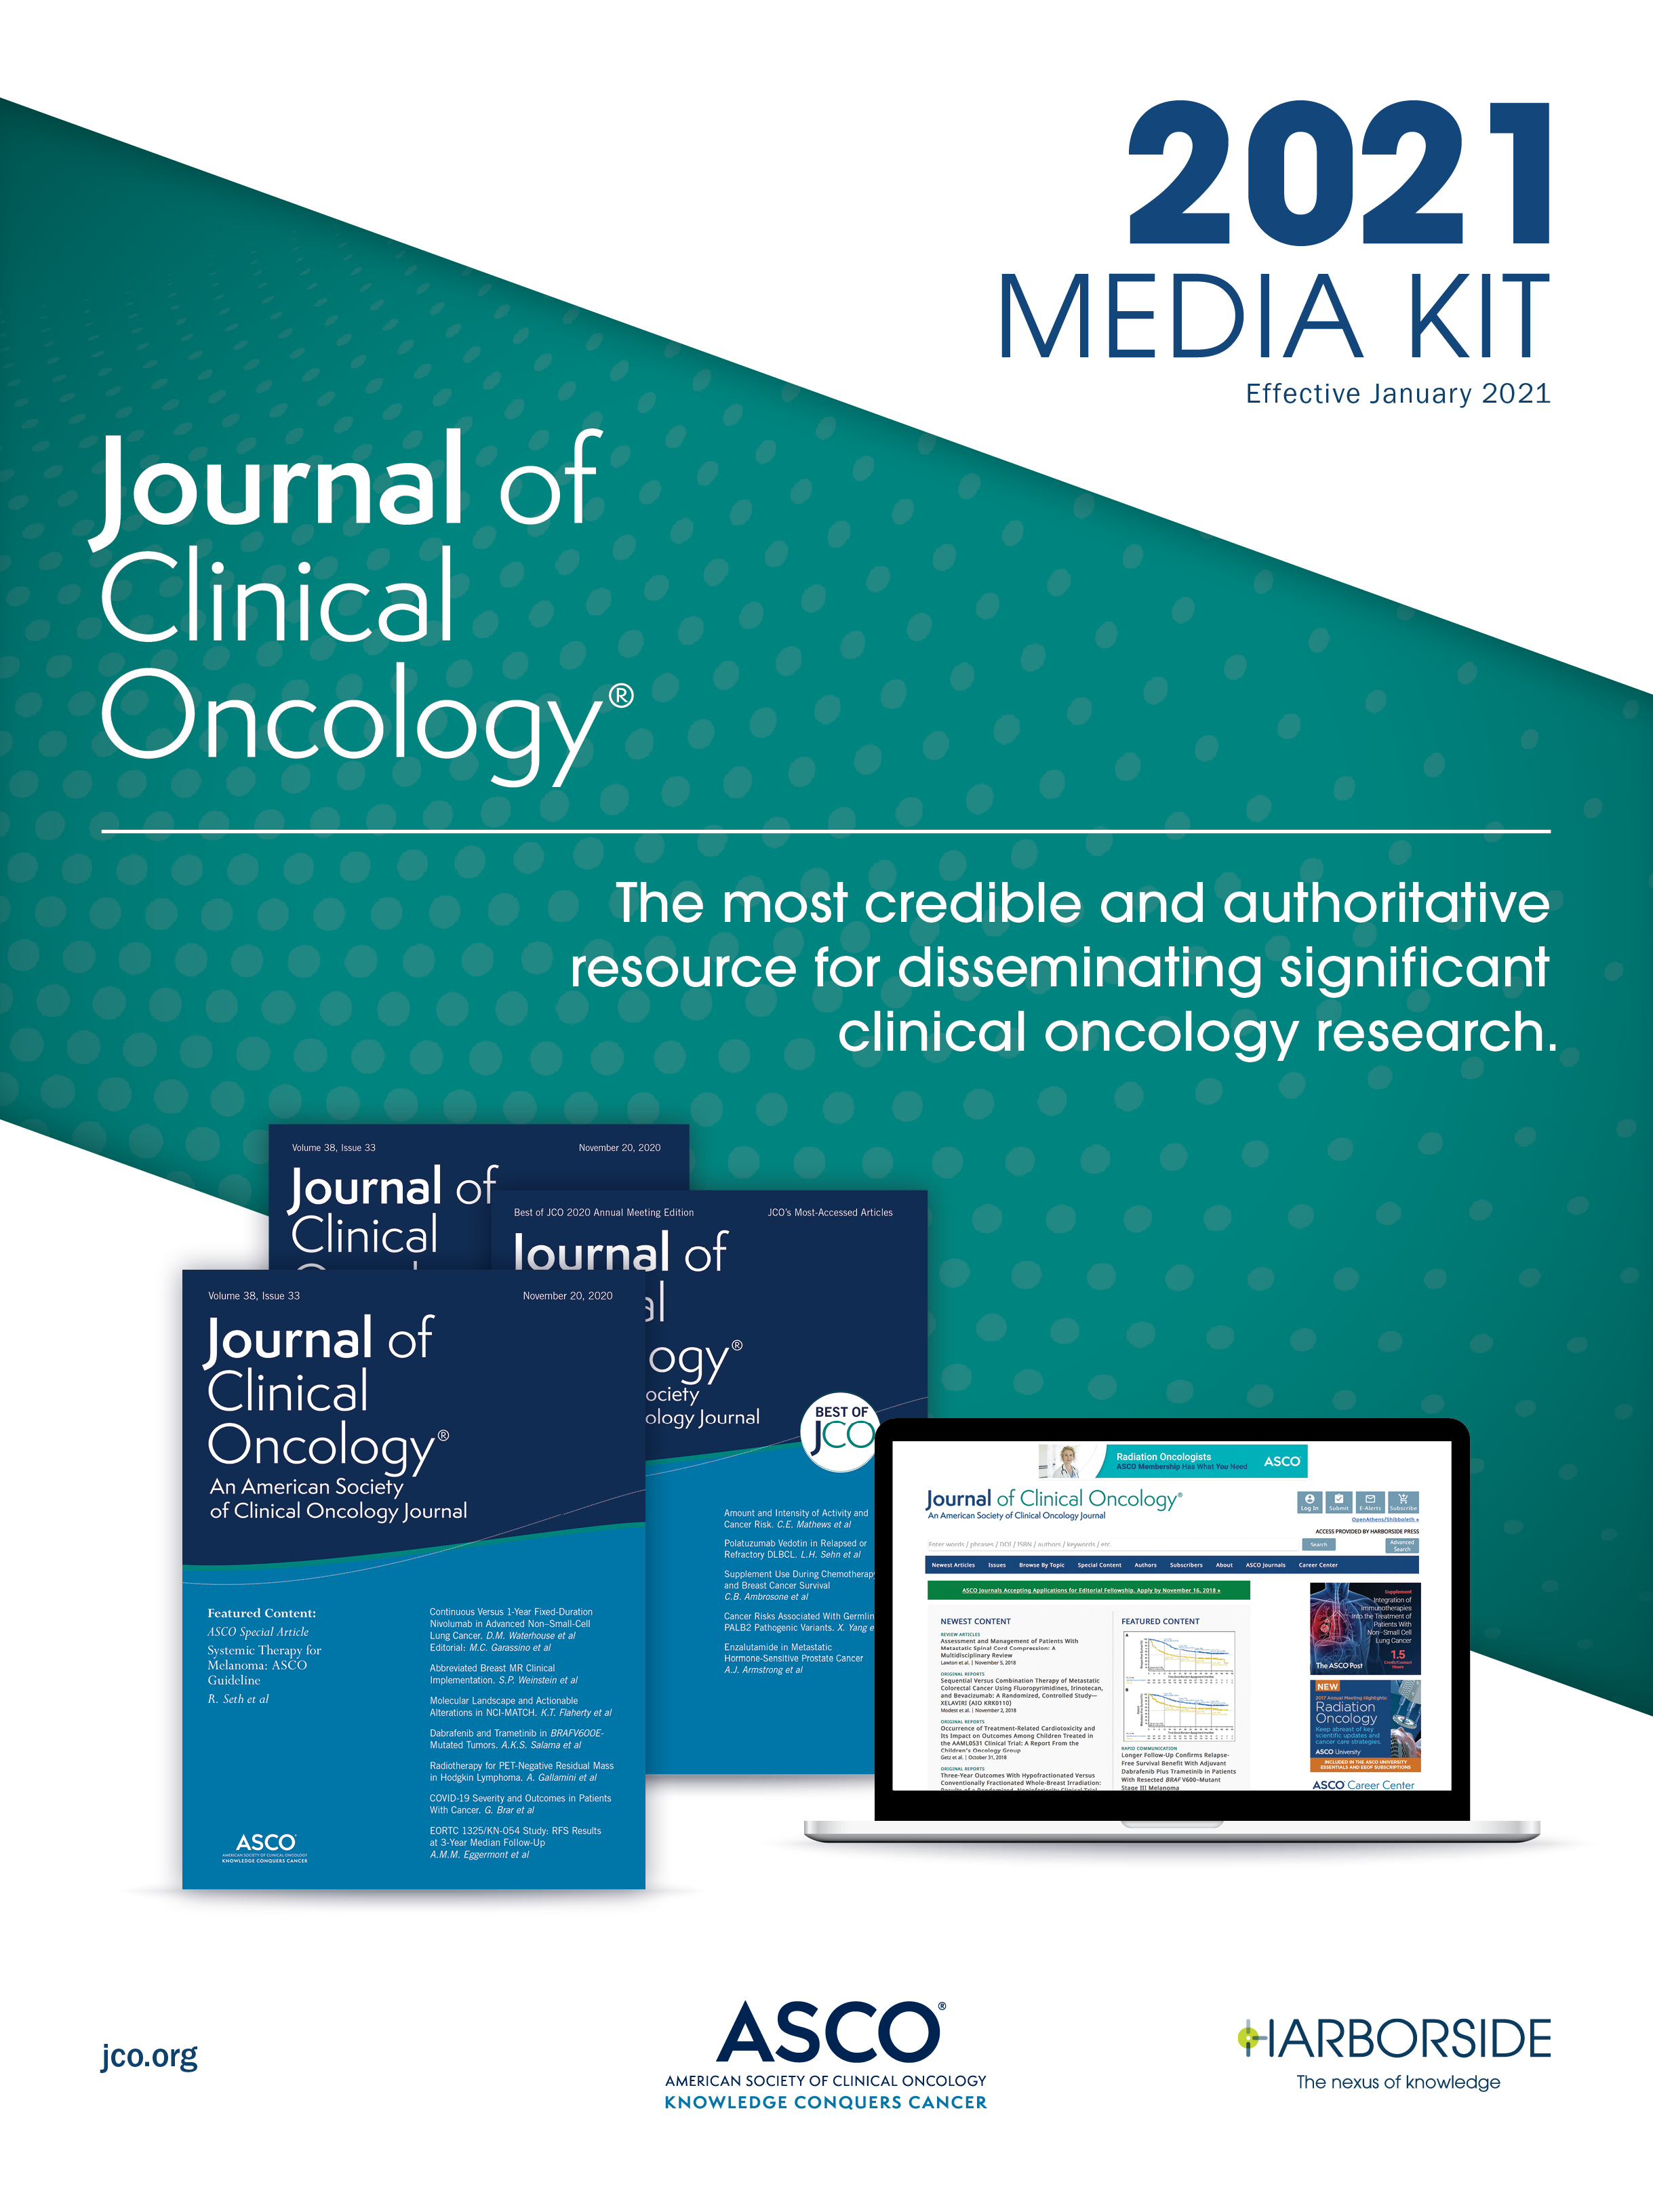 Journal of Clinical Oncology Rate Card Image